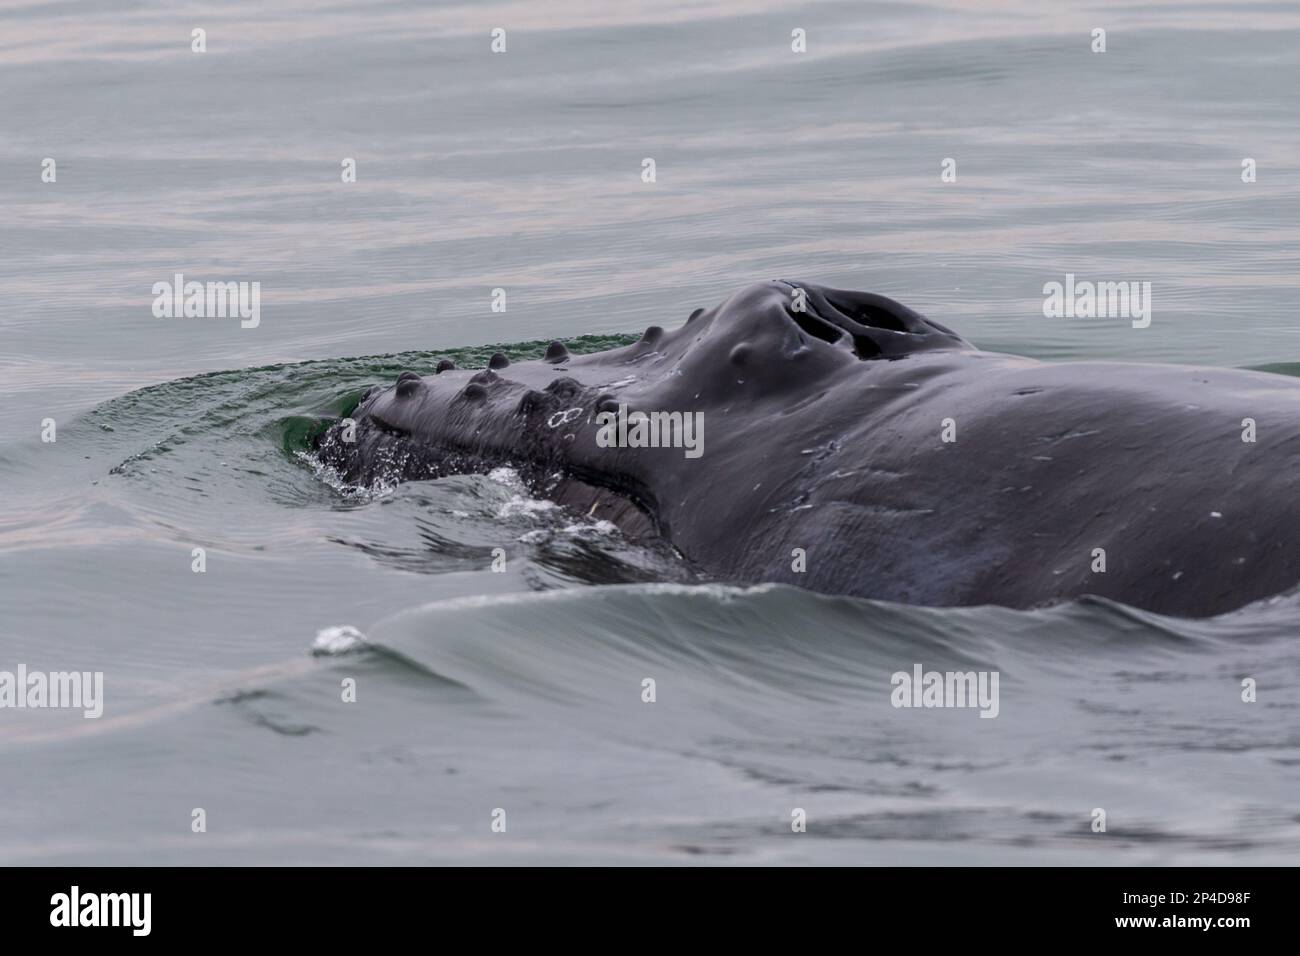 Blowhole and dosal fin of a surfacing whale, in Walvis Bay, Namibia. Stock Photo